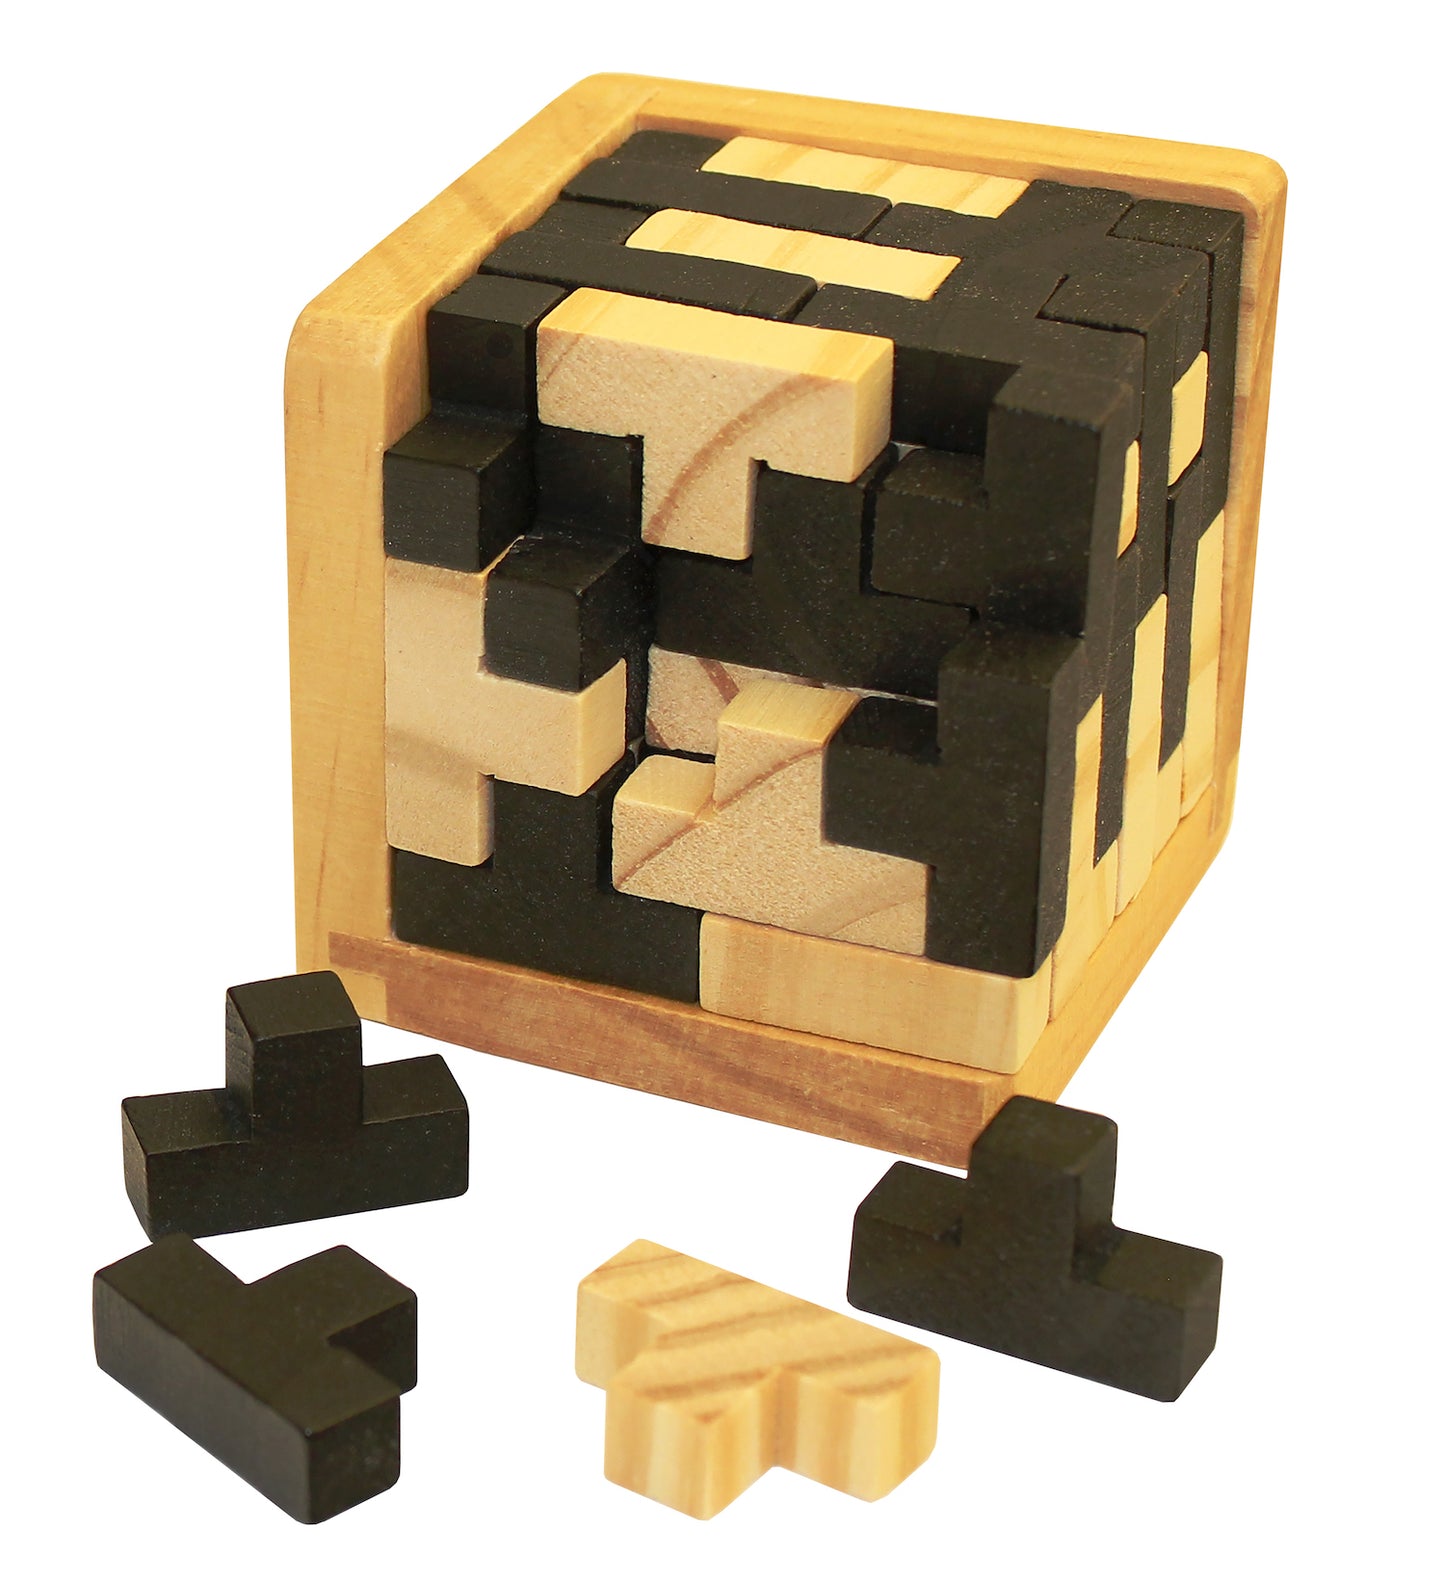 54 Piece Wooden Cube Puzzle,with Tetris Type Blocks, Educational Toy for Kids and Adults …